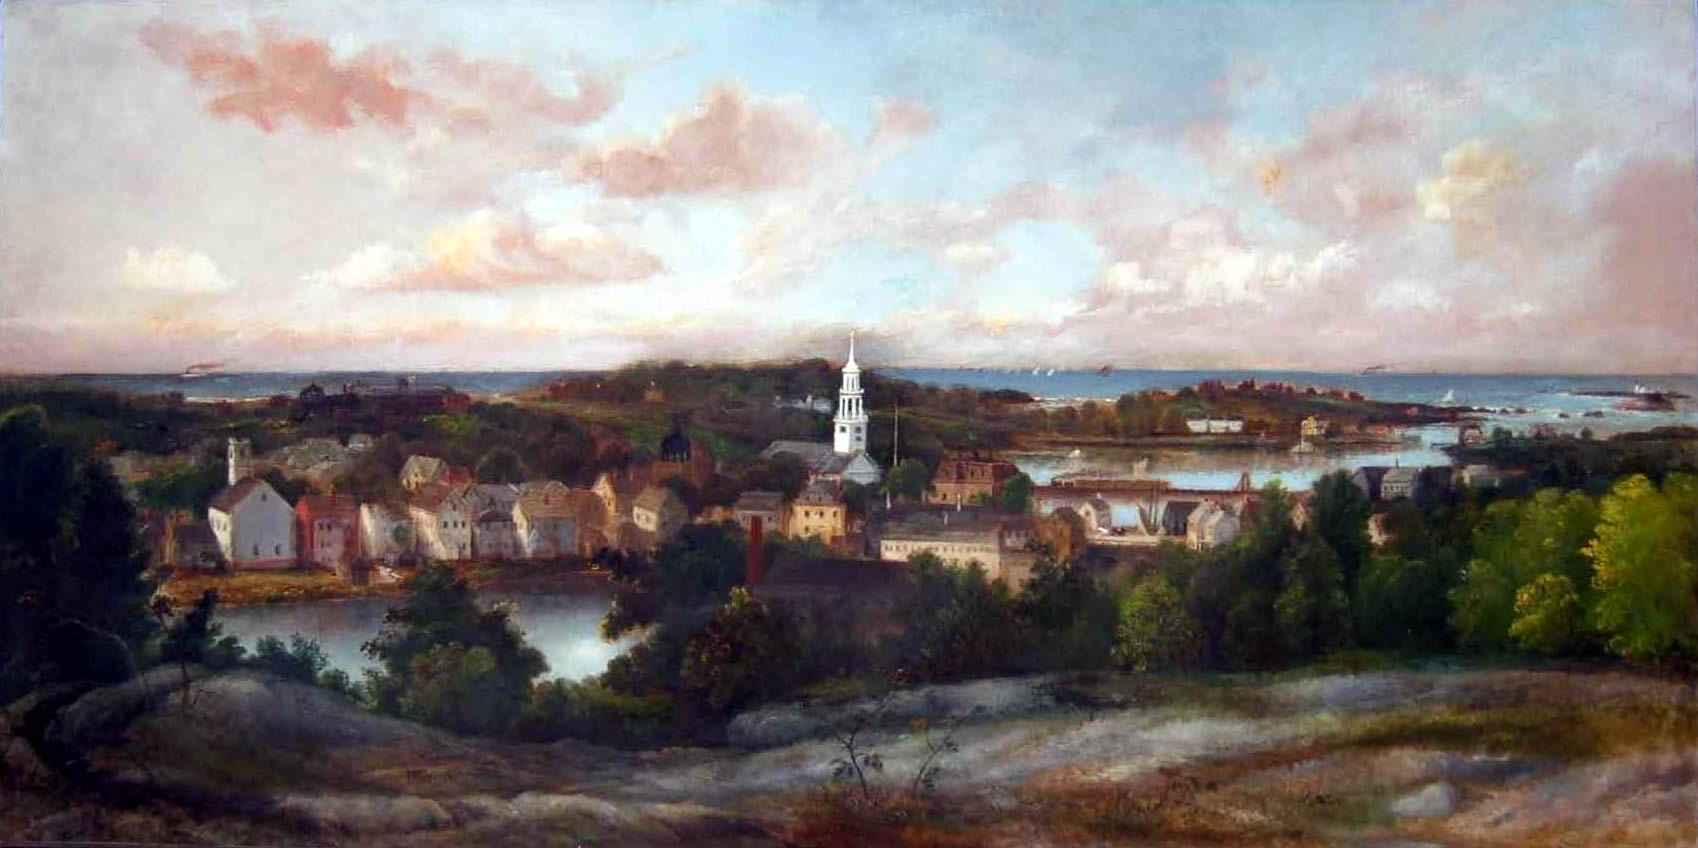 A painting of Manchester from Powder House Hill by Joshua Sheldon that hangs in 